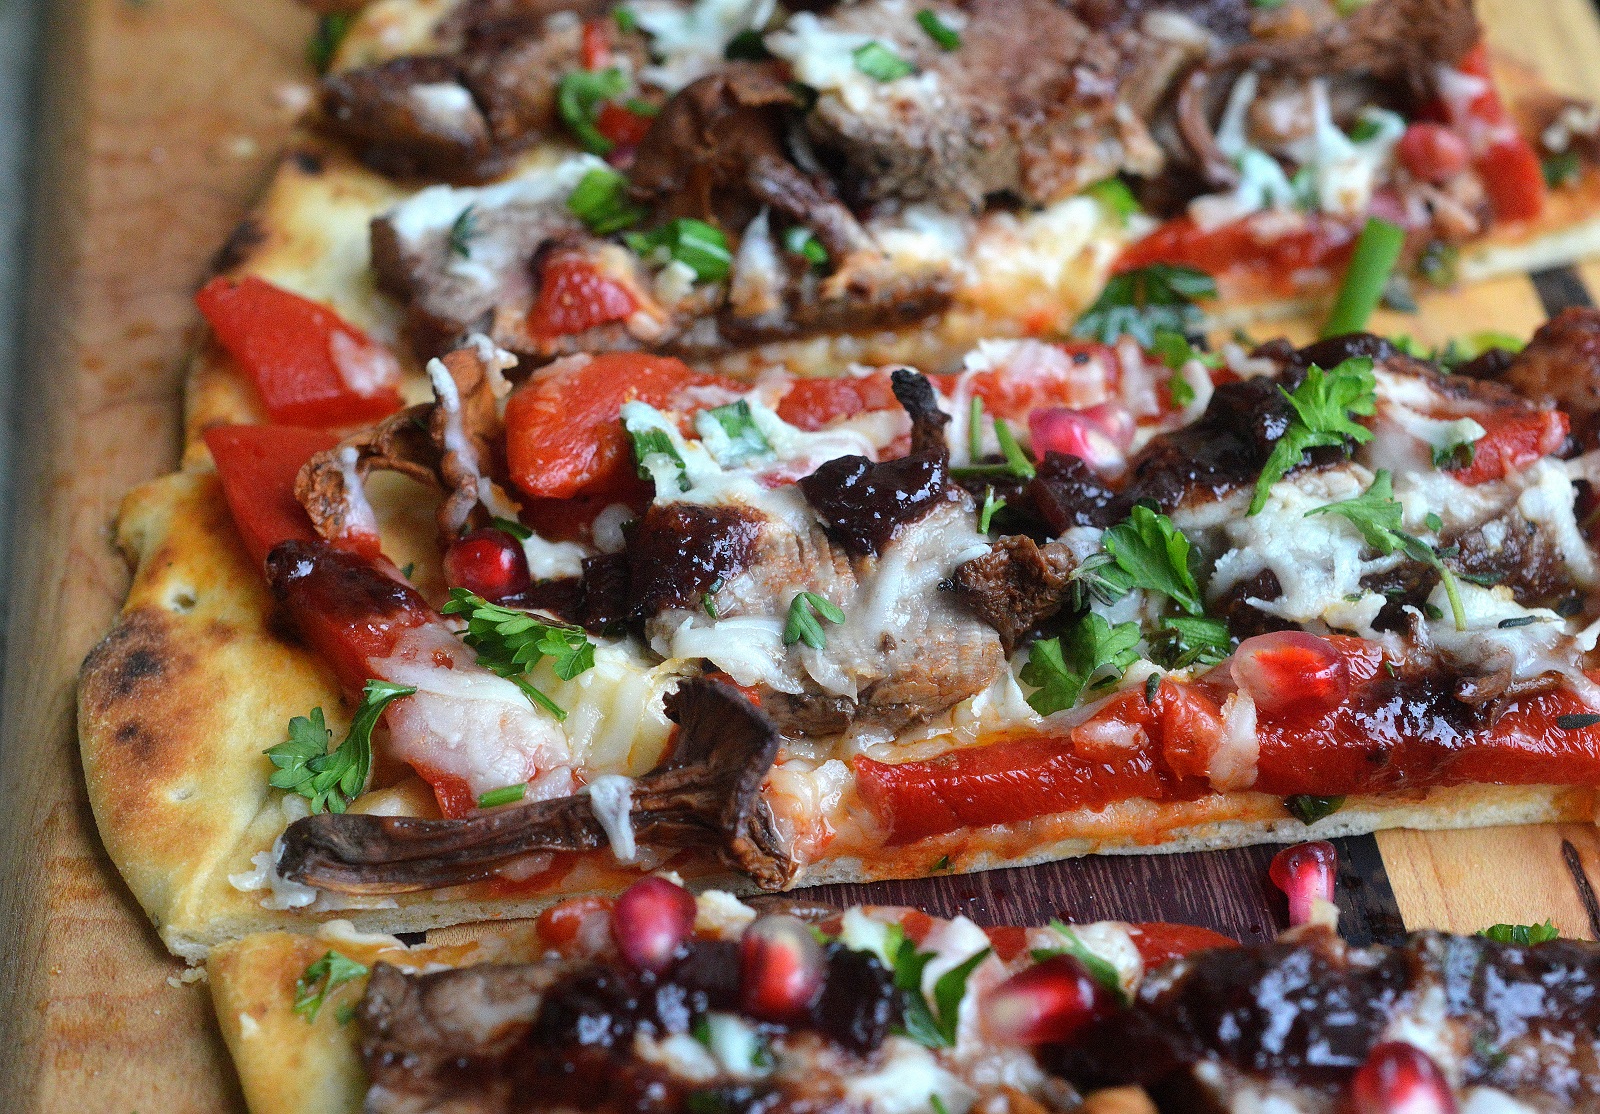 Steak Flatbread with Roasted Red Peppers and Mushrooms